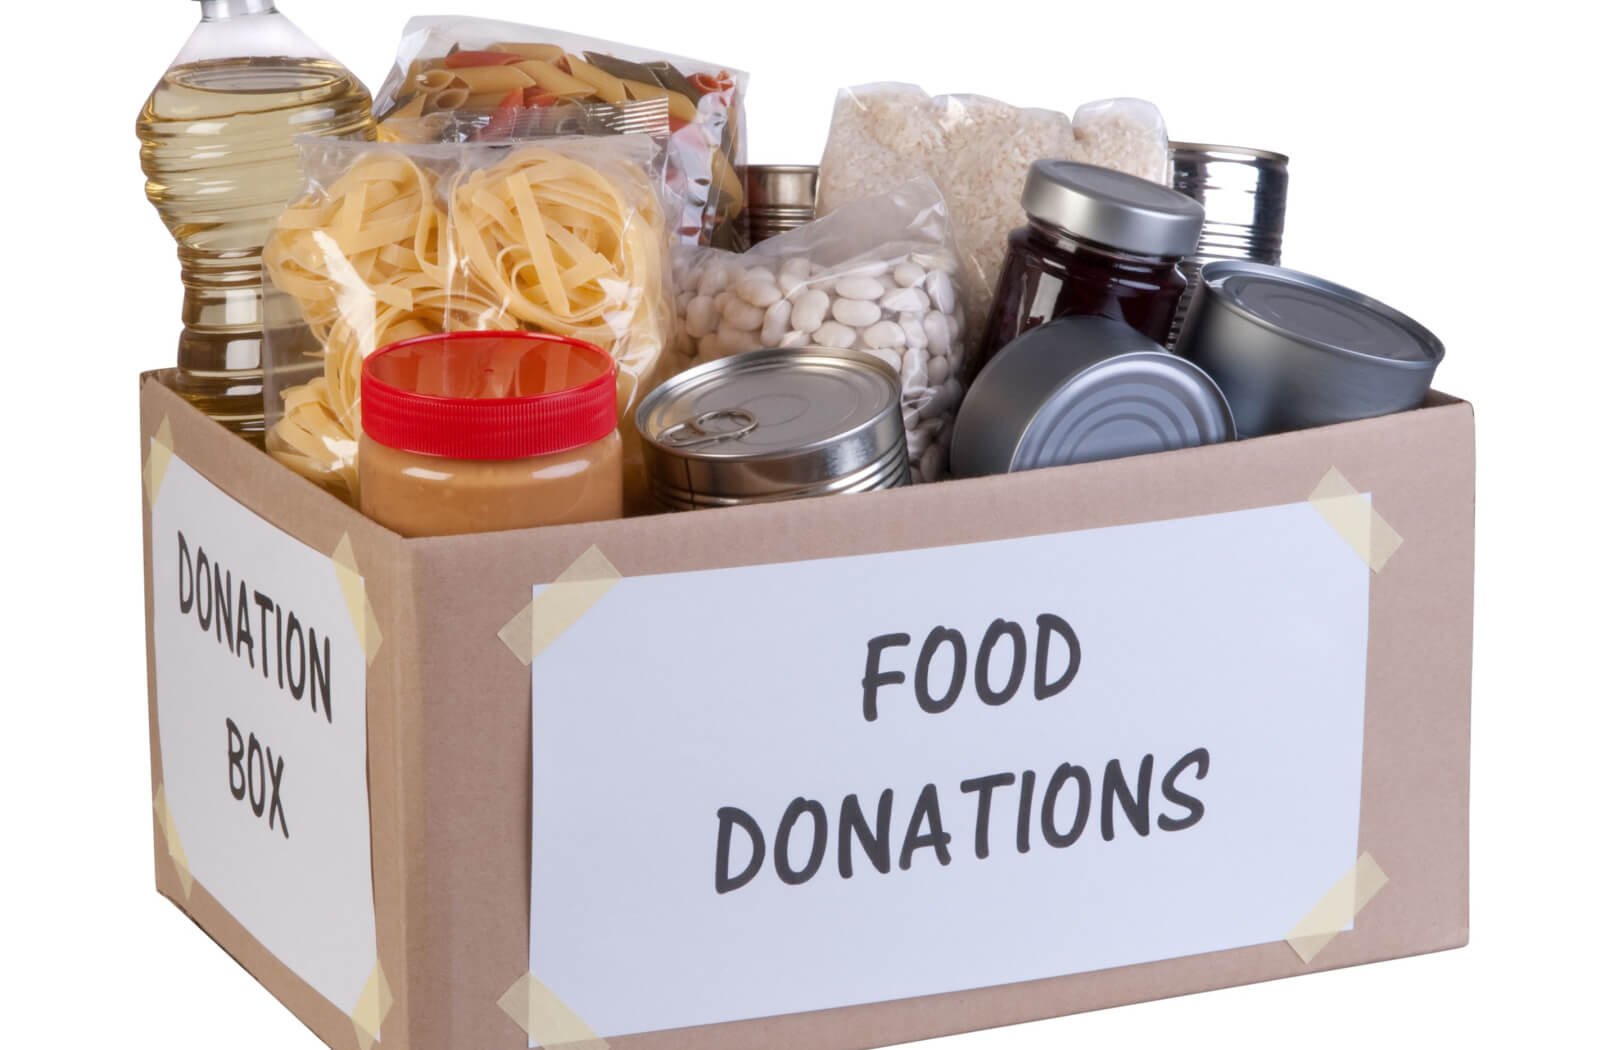 a cardboard box with a printed sign saying "Food Donations" is filled with nonperishable items like canned goods, pasta and beans intended for distribution to a homeless person